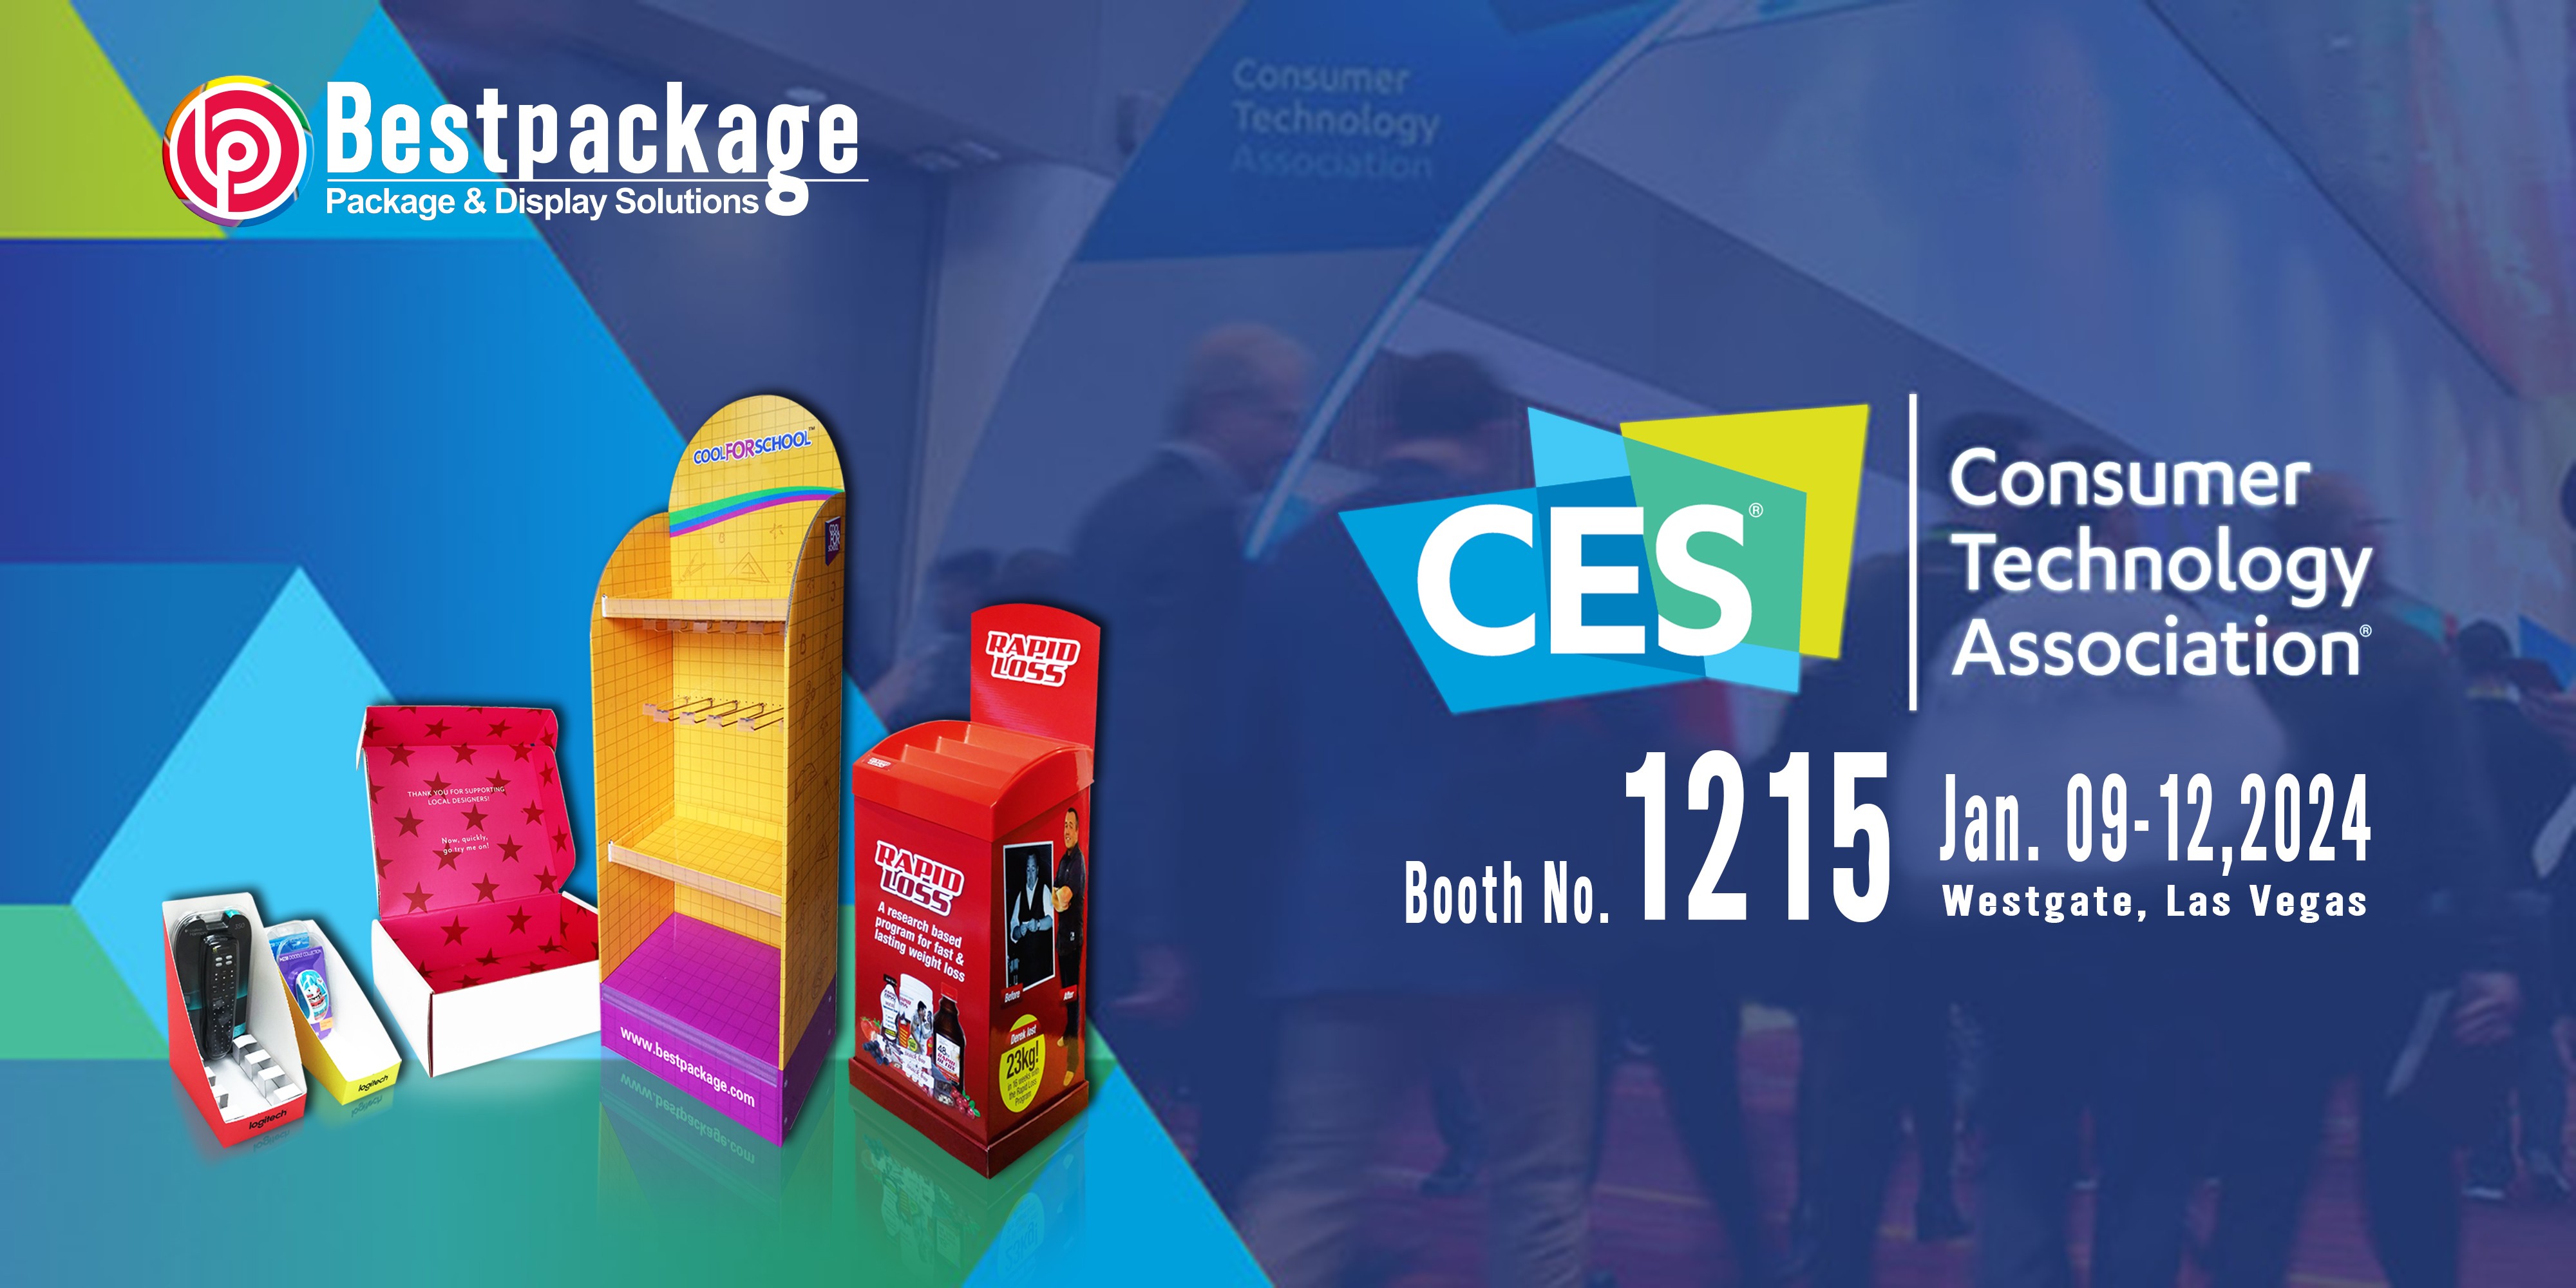 We are attending CES from Jan 9th -12th,2024, Welcome to visit our booth #1215, Westgate Las Vegas.